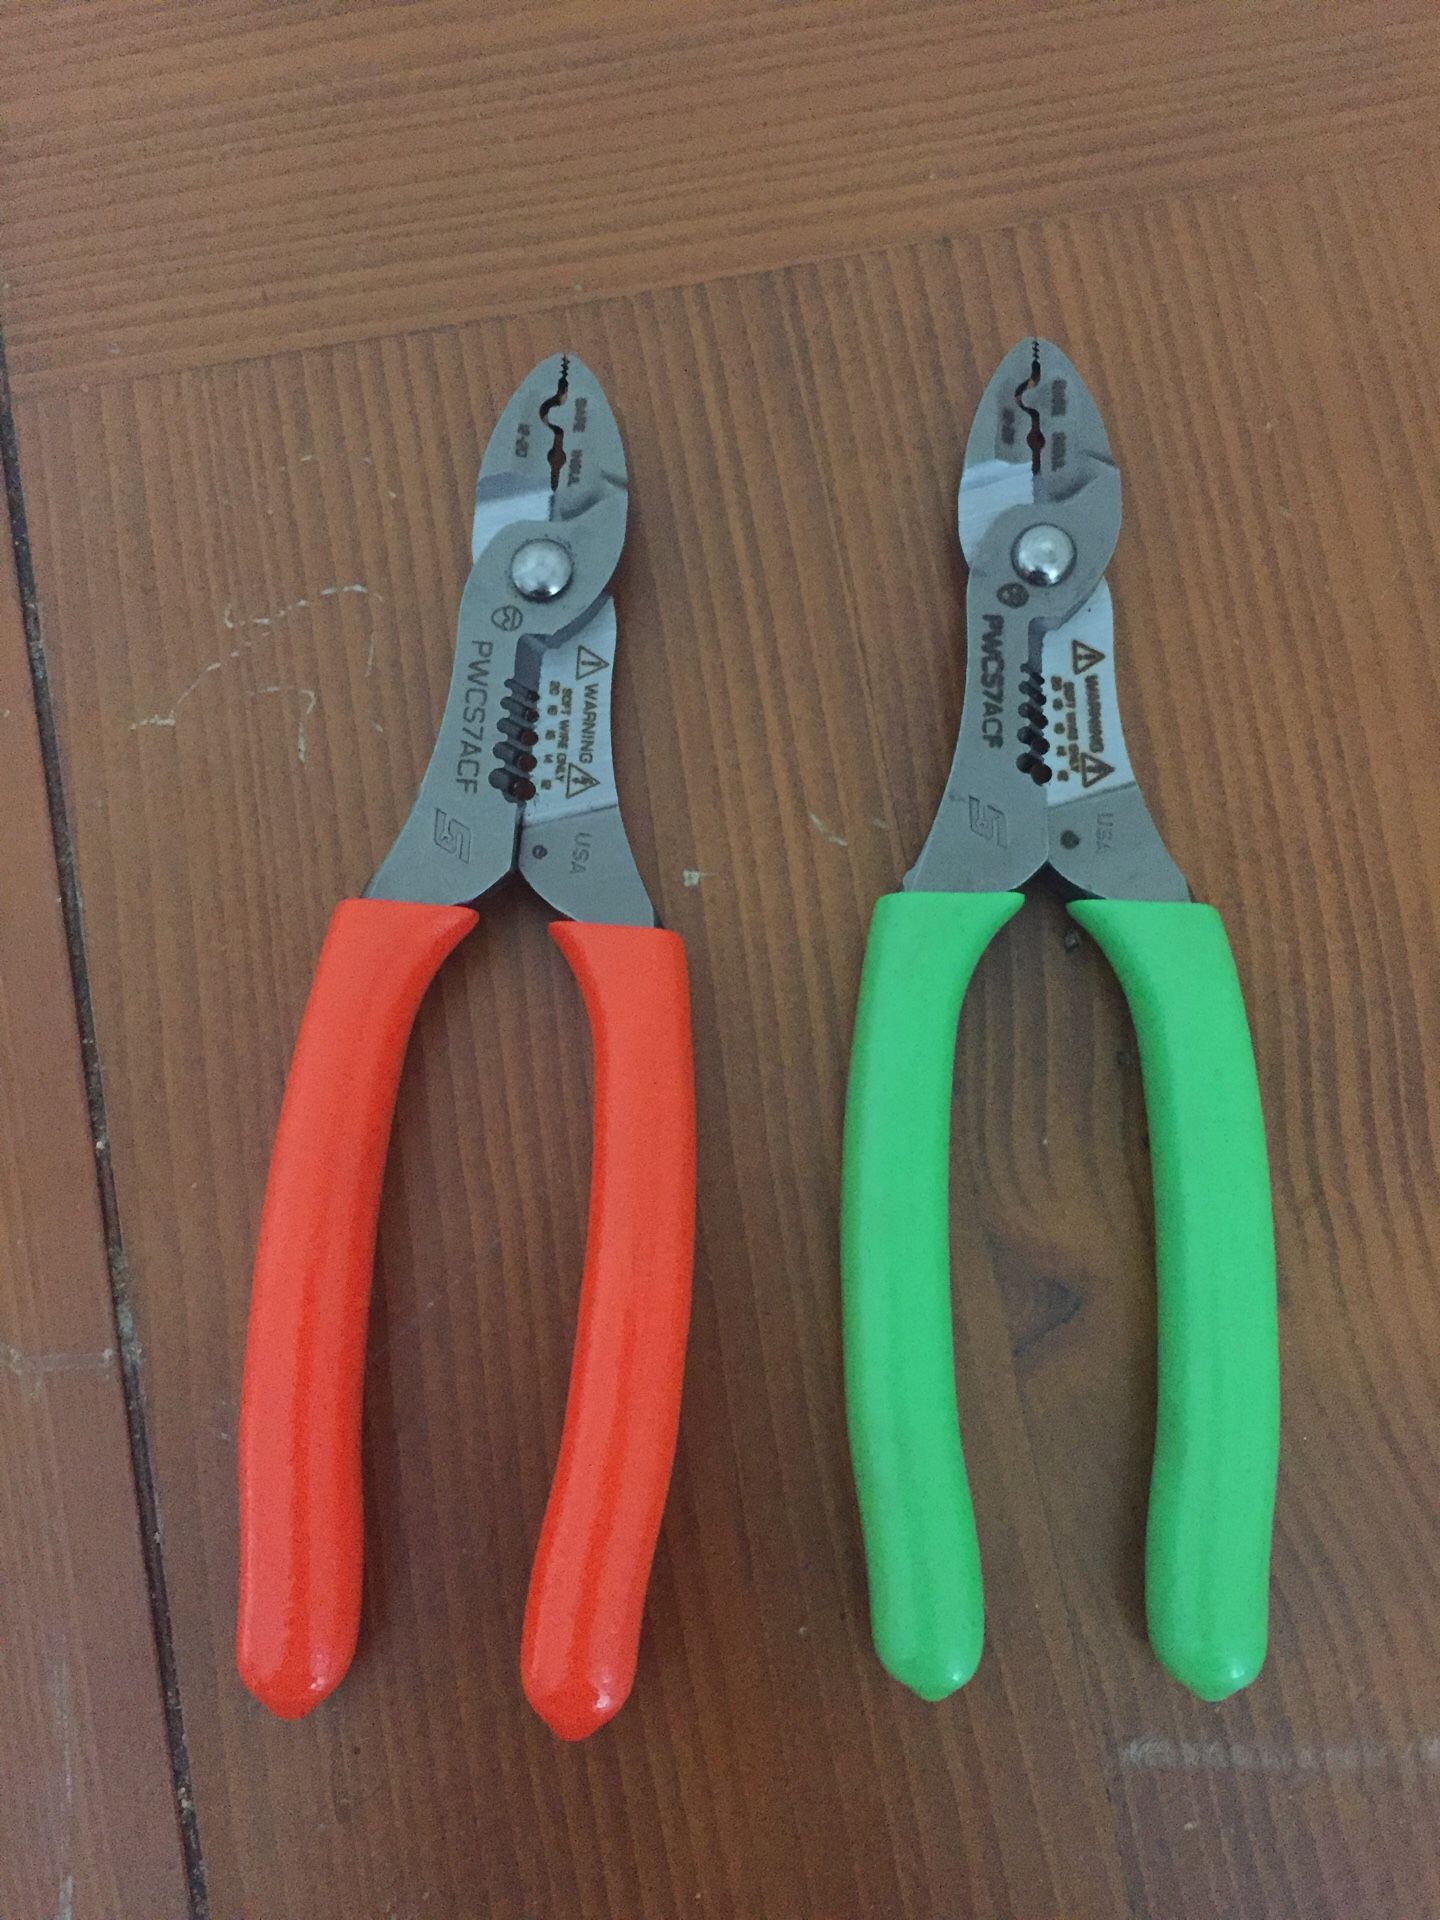 for sale online Snap-on PWCS7ACF Red Wire Cutter Stripper and Crimper Pliers 